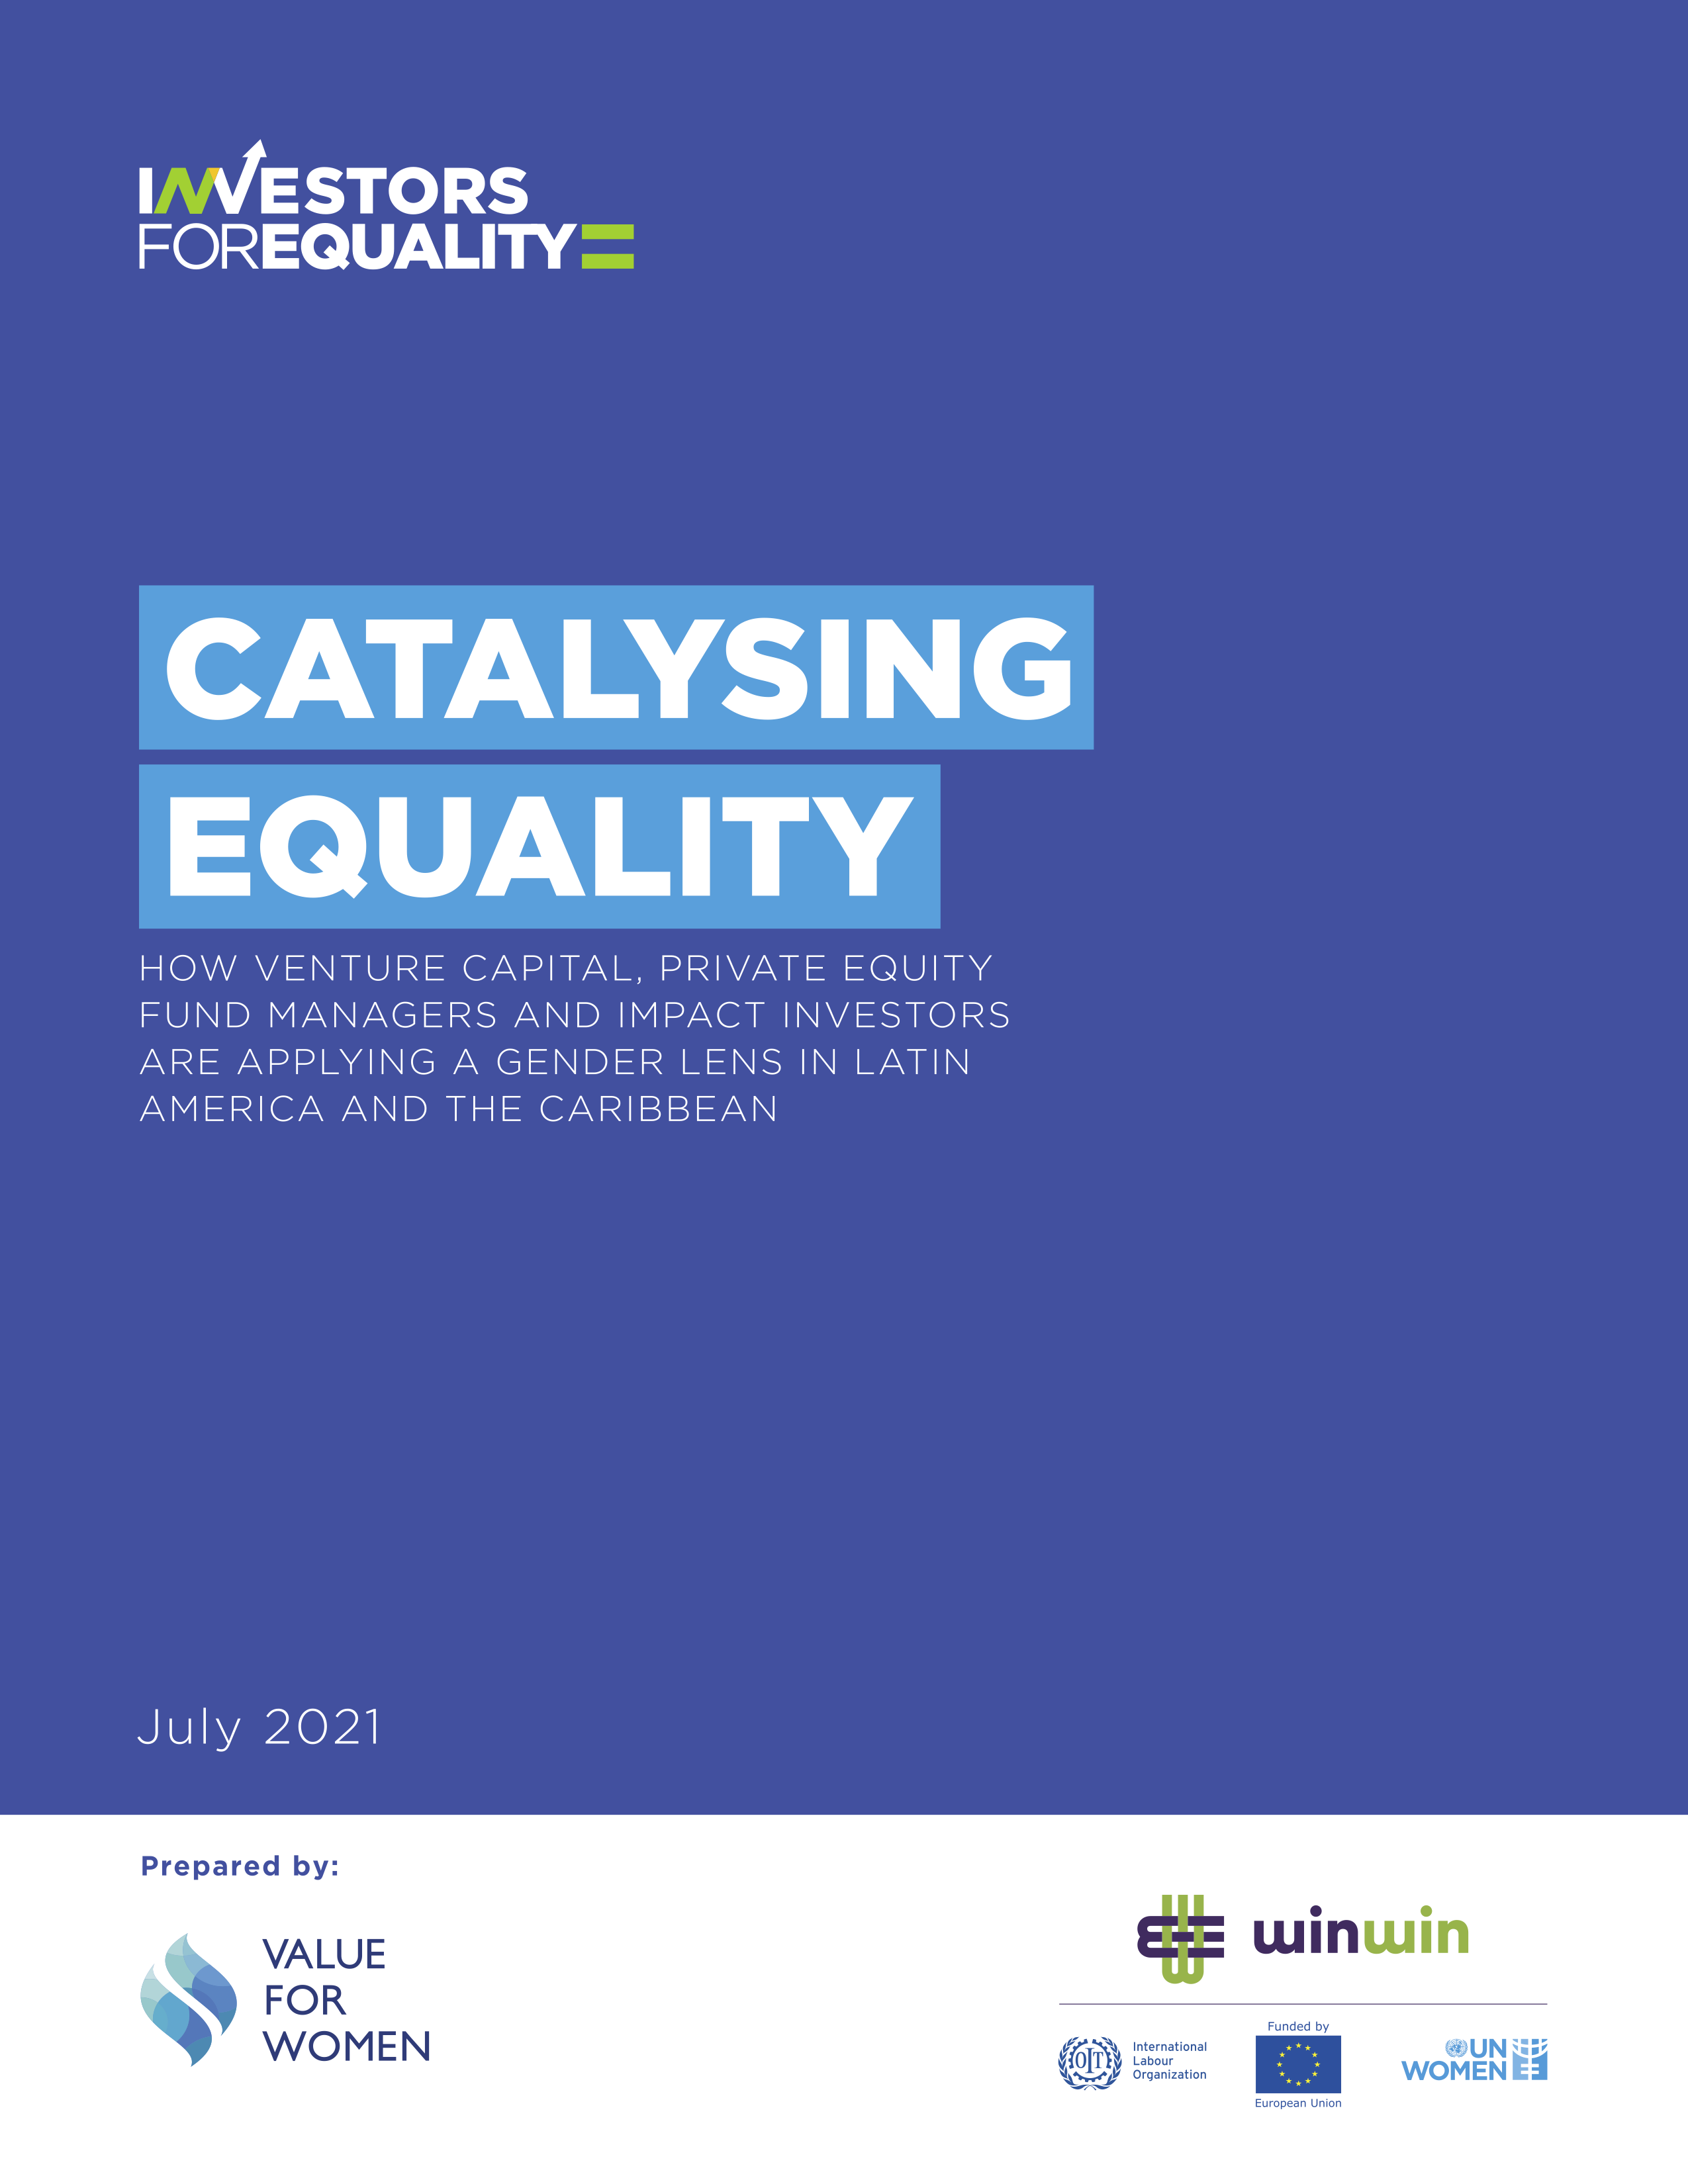 Catalyzing Equality: How Venture Capital, Private Equity, Fund Managers and Impact Investors are Applying a Gender Lens in LAC